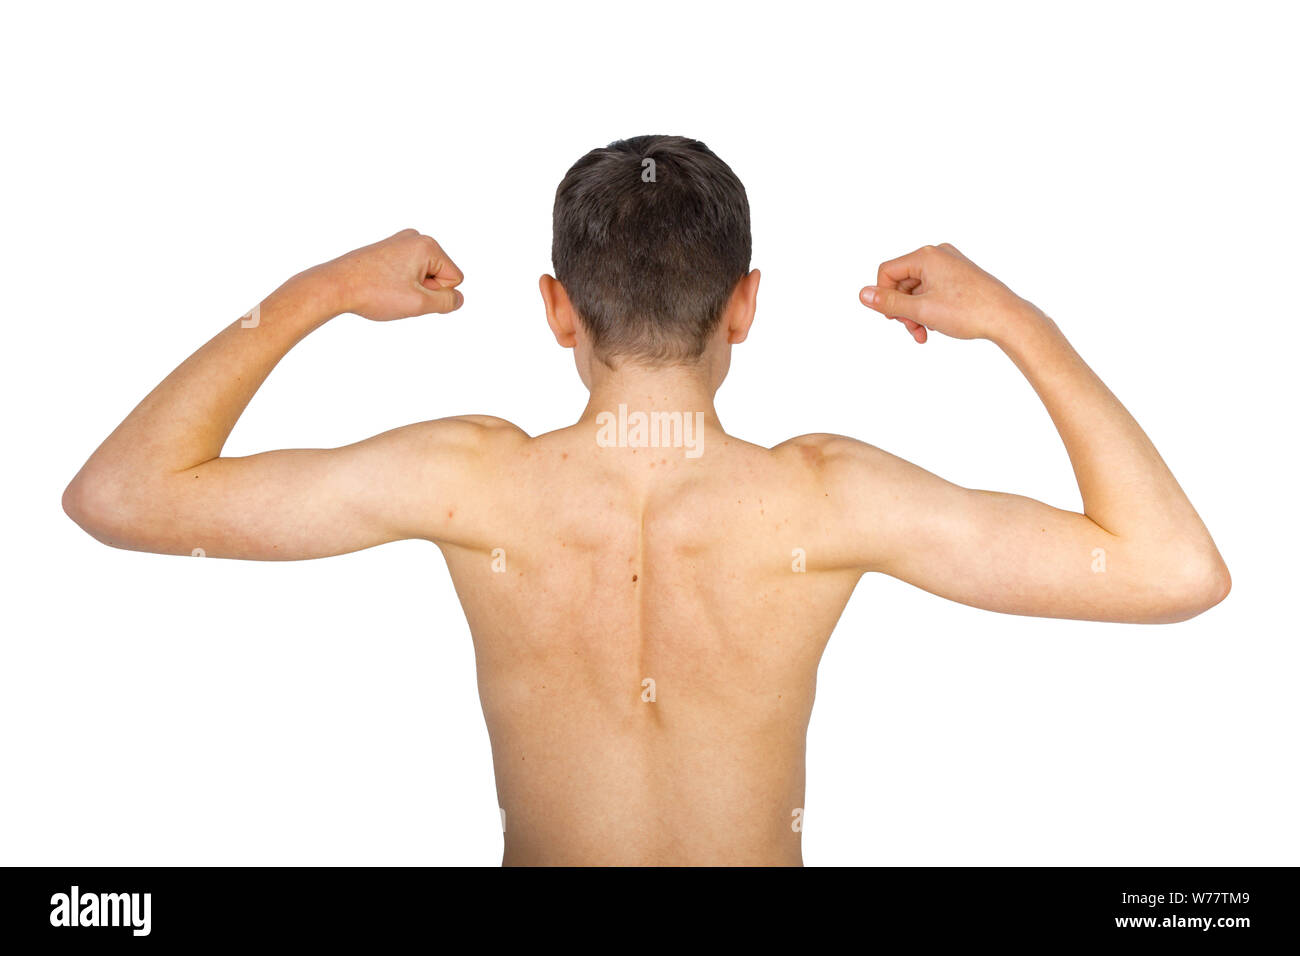 Teenage boy flexing his back muscles isolated on a white